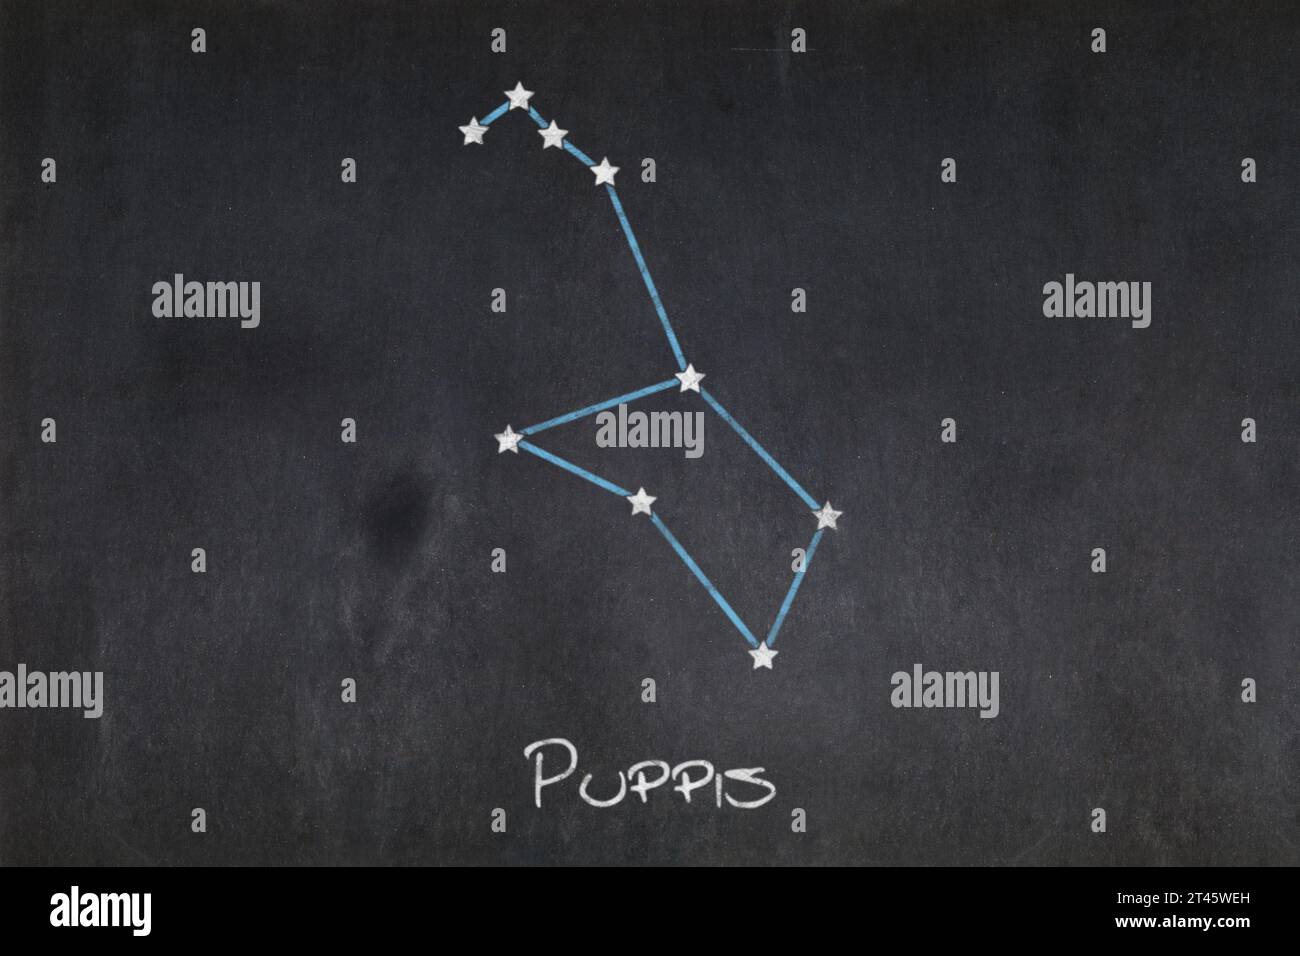 Blackboard with the Puppis constellation drawn in the middle. Stock Photo